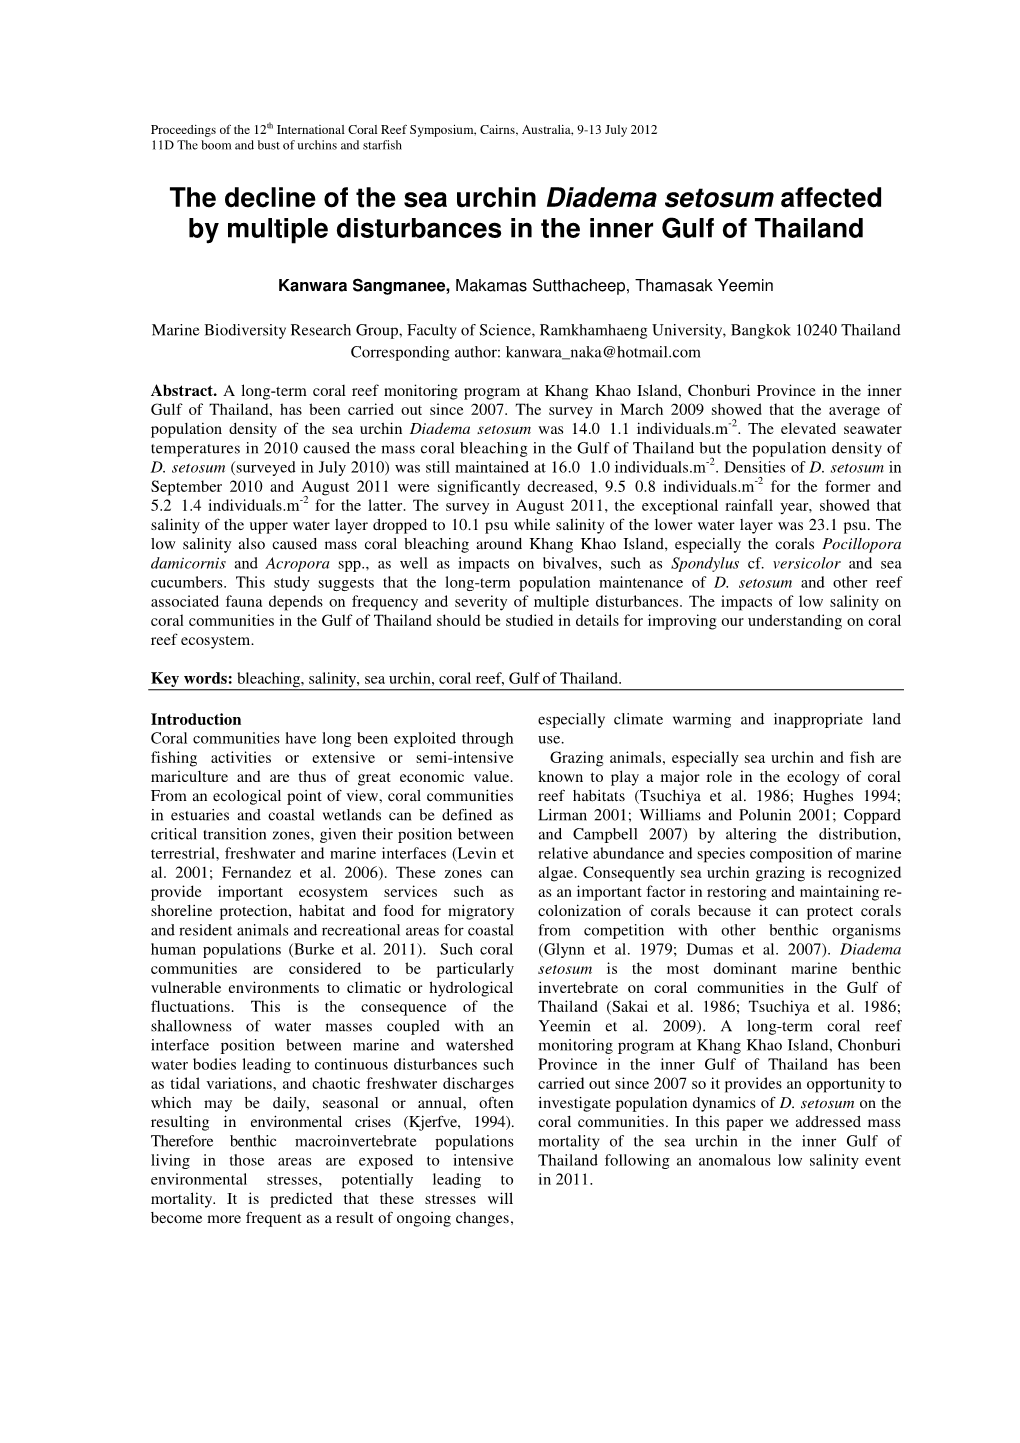 The Decline of the Sea Urchin Diadema Setosum Affected by Multiple Disturbances in the Inner Gulf of Thailand